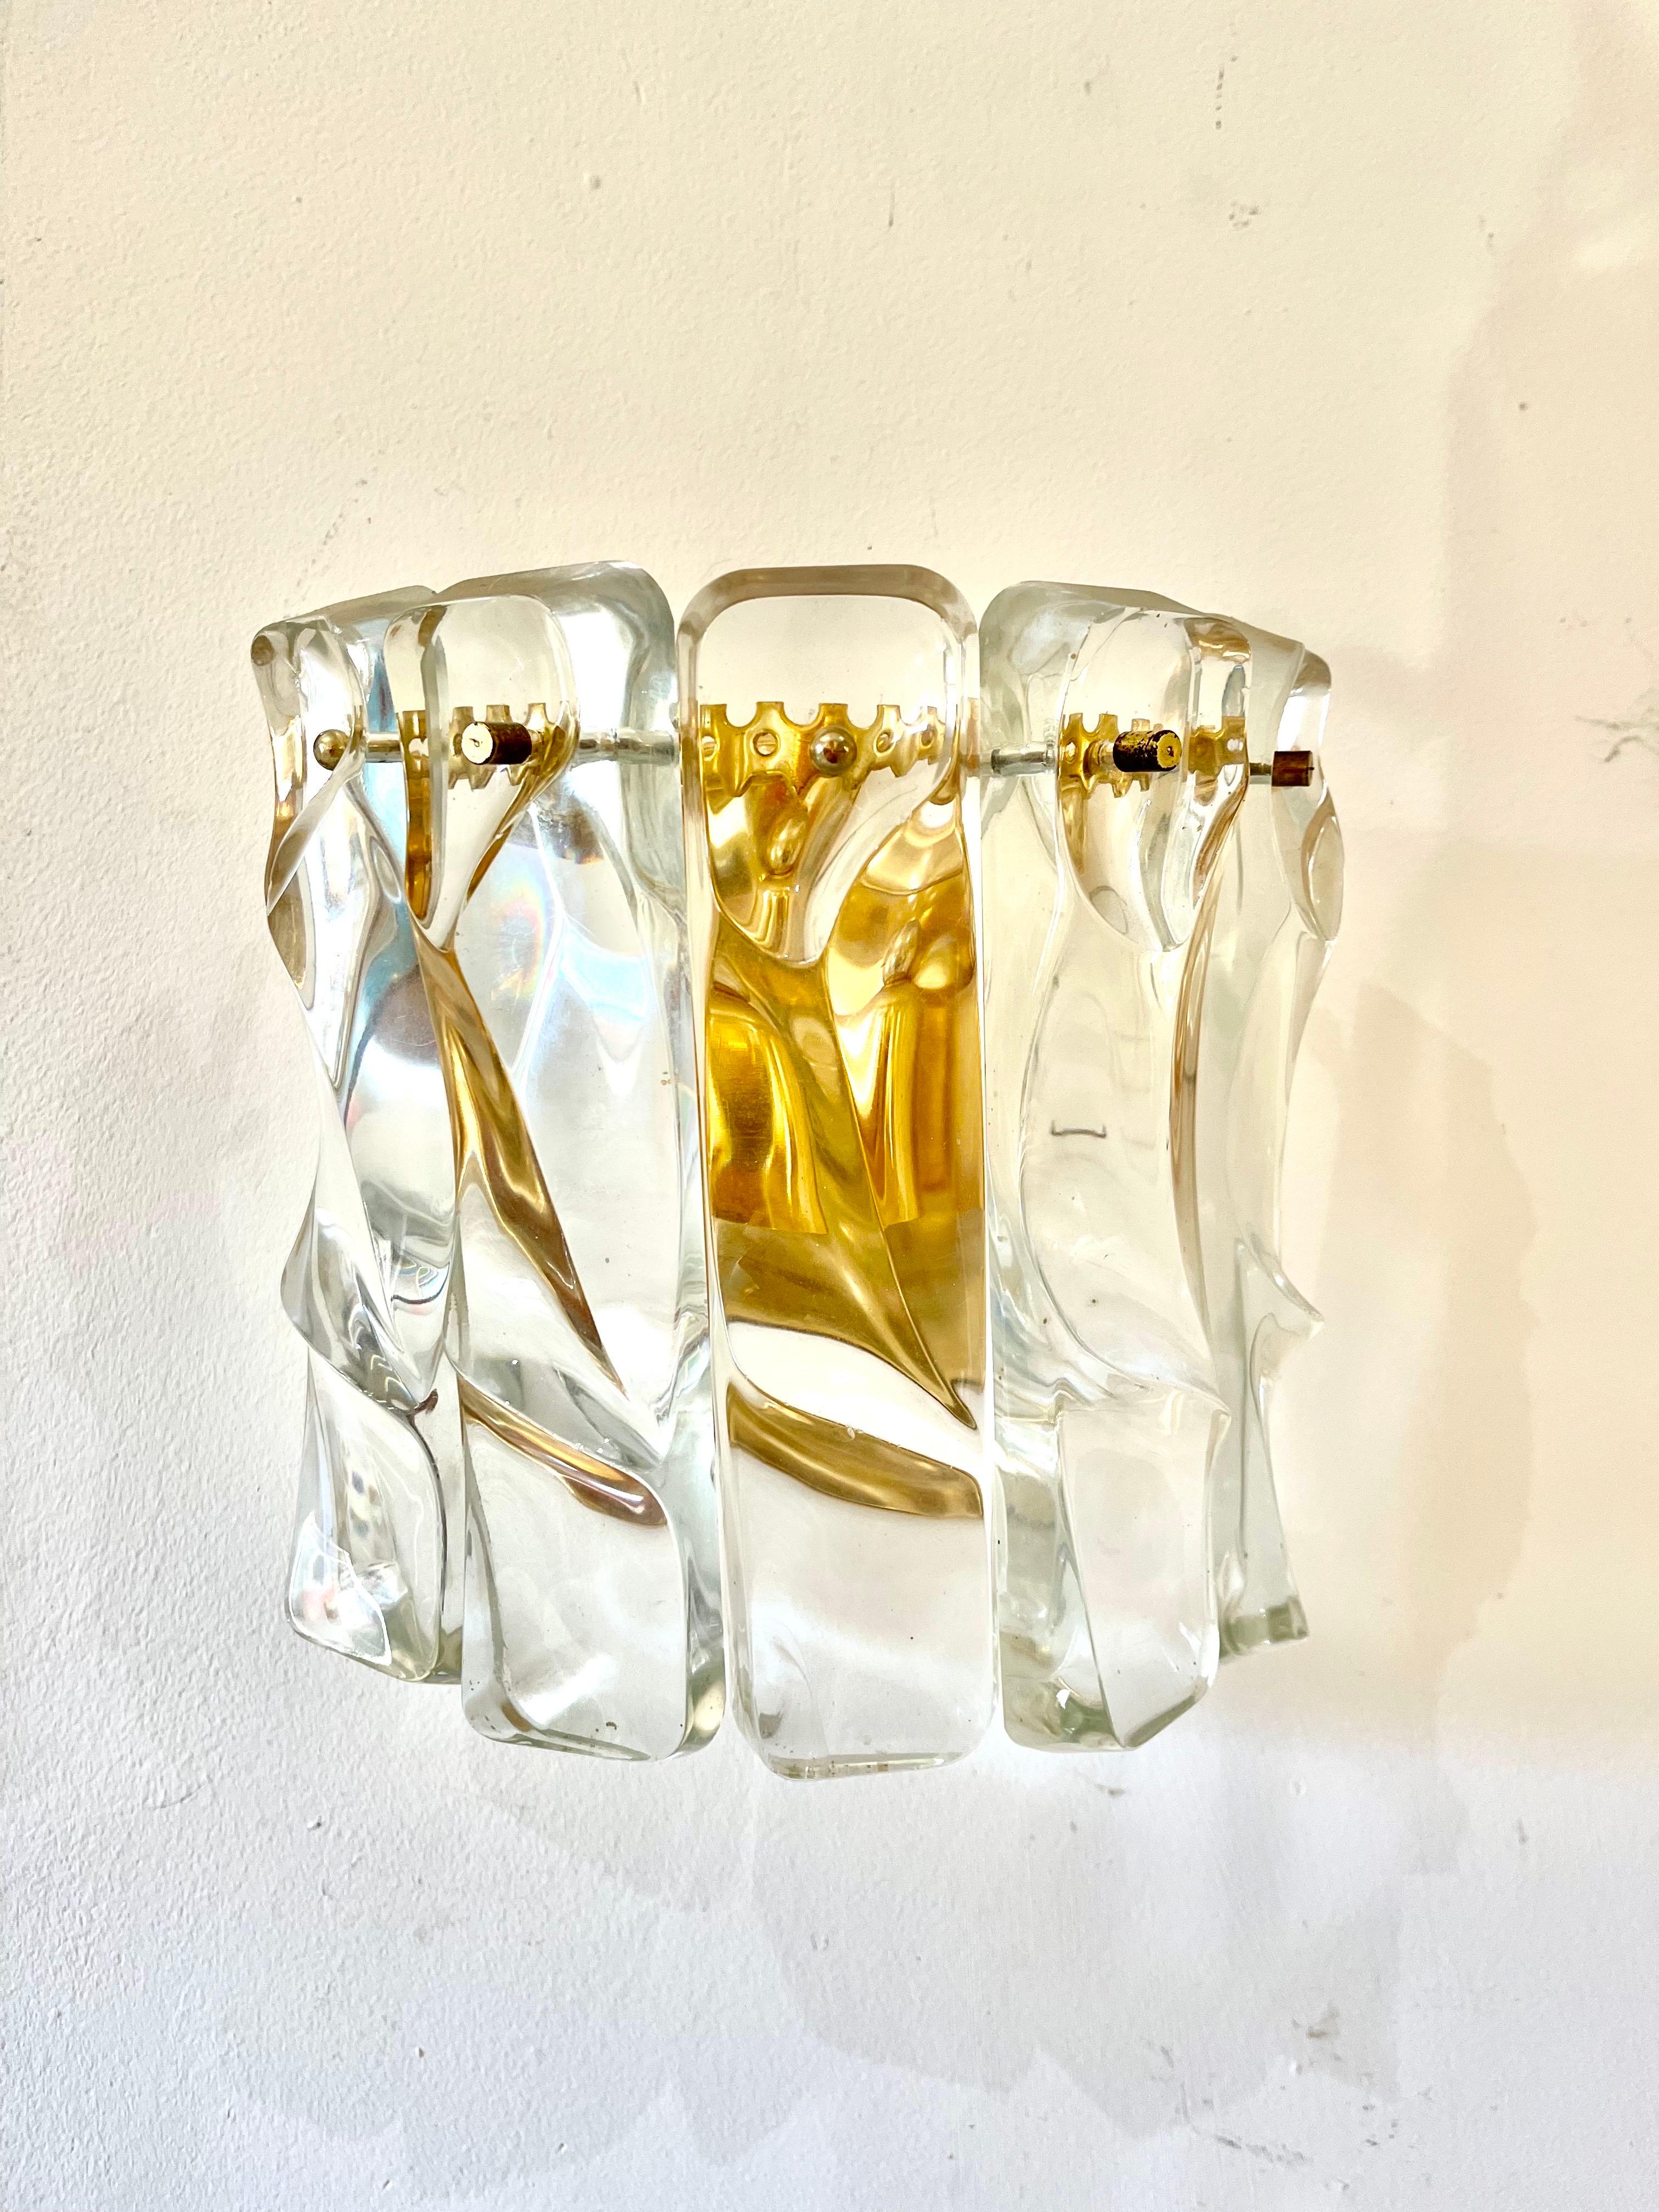 Exceptional pair of JT Kalmar wall lighting with large leaves ice frost glass. The Design and the quality of the glass make this piece the best of the austrian Design.

discount shipping * private quote option 

This unique pair of Kalmar wall